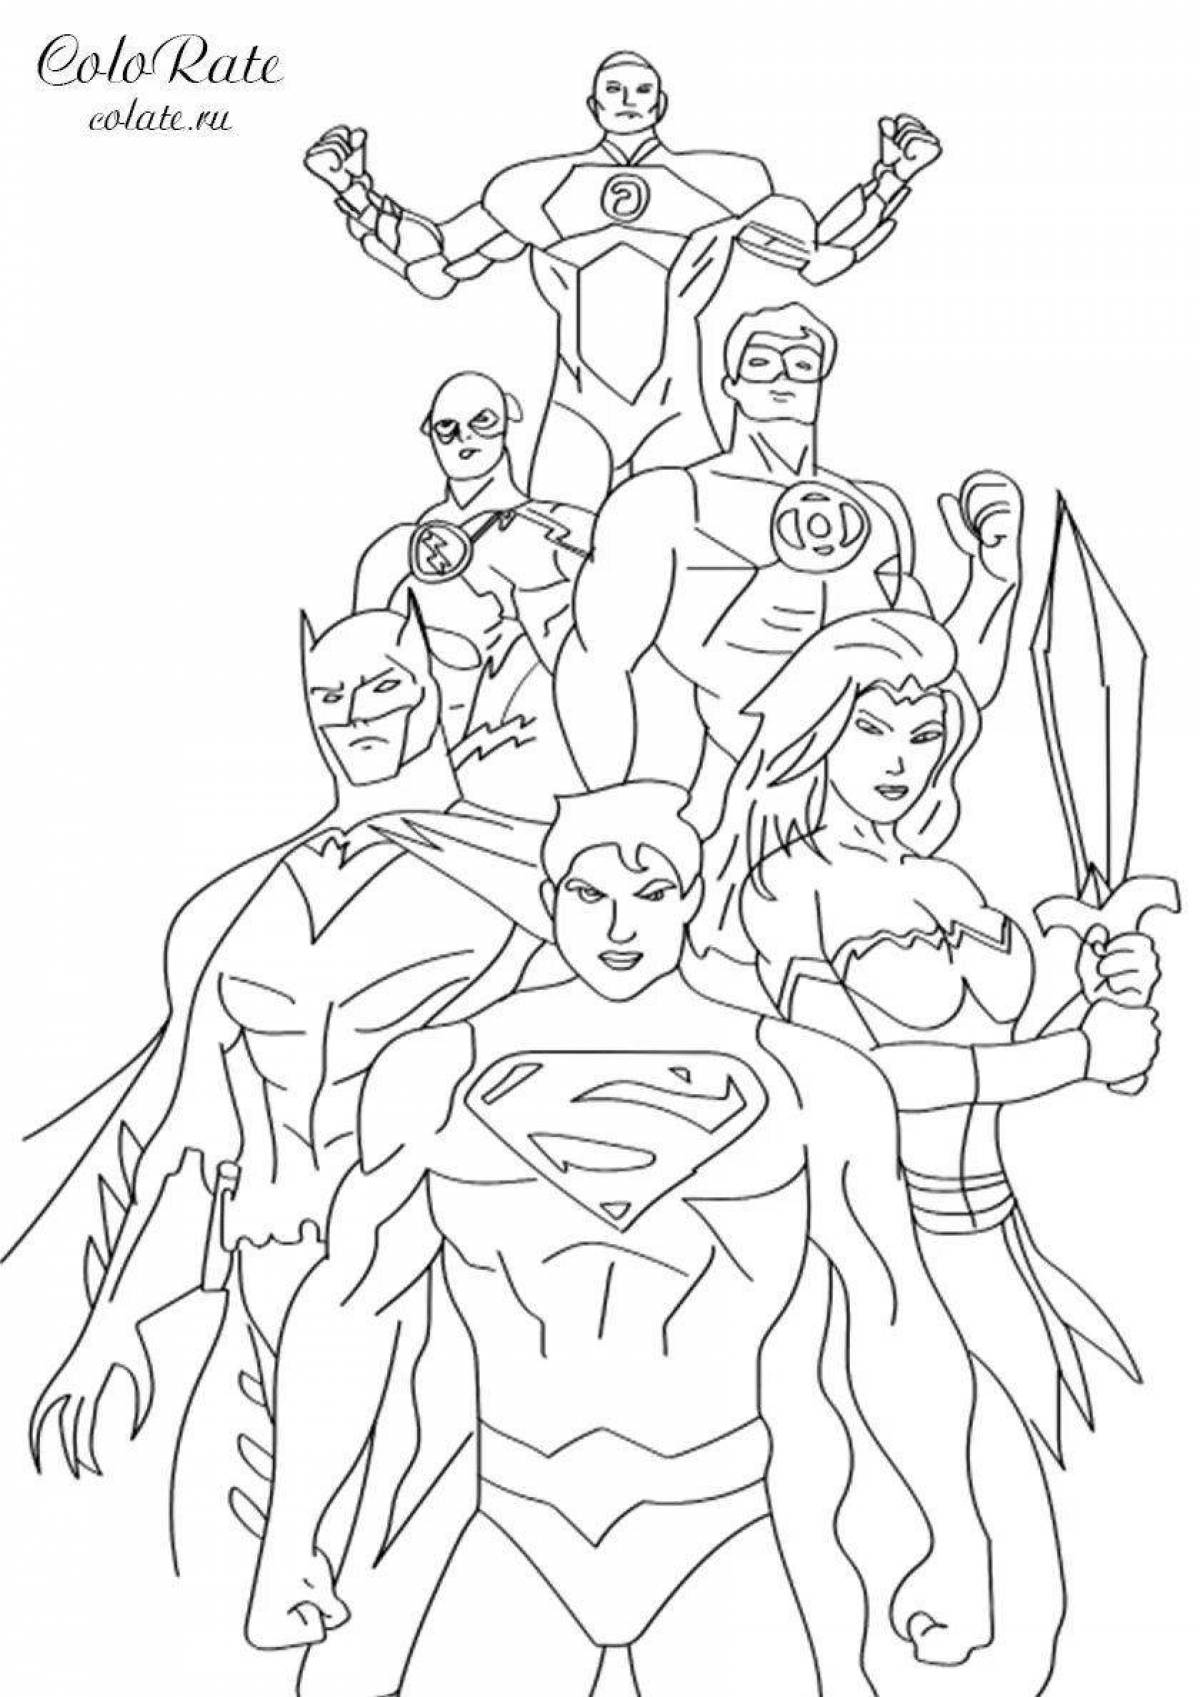 Super heroes whole team glitter coloring book